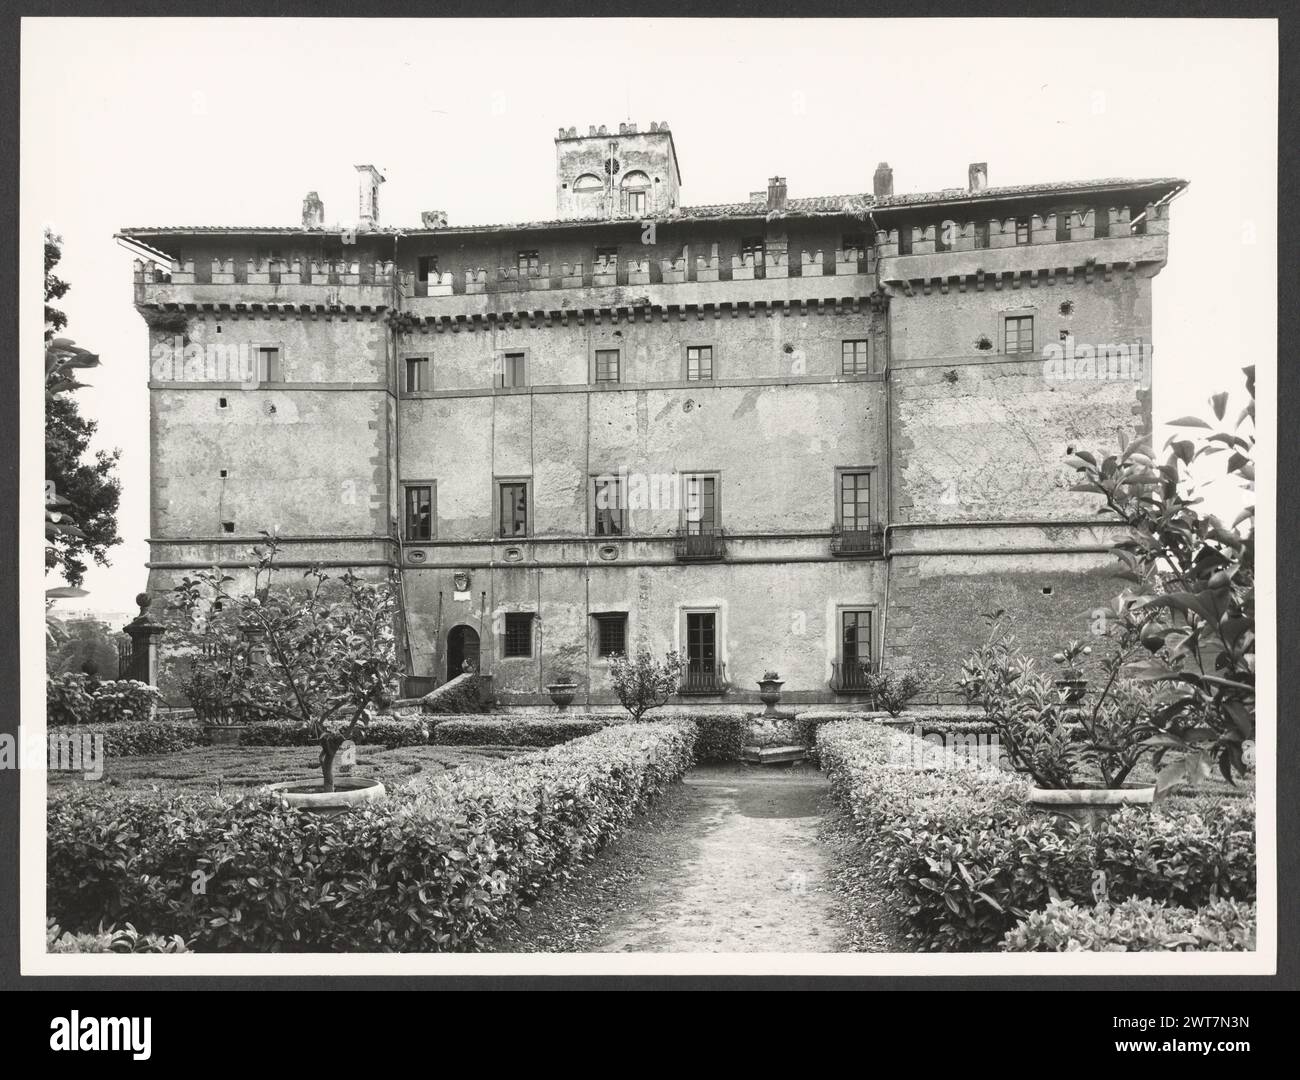 Lazio Viterbo Vignanello Castello Ruspoli. Hutzel, Max 1960-1990 Exterior views of all sides of castle, renovated 1575, including rear view of park. German-born photographer and scholar Max Hutzel (1911-1988) photographed in Italy from the early 1960s until his death. The result of this project, referred to by Hutzel as Foto Arte Minore, is thorough documentation of art historical development in Italy up to the 18th century, including objects of the Etruscans and the Romans, as well as early Medieval, Romanesque, Gothic, Renaissance and Baroque monuments. Images are organized by geographic reg Stock Photo